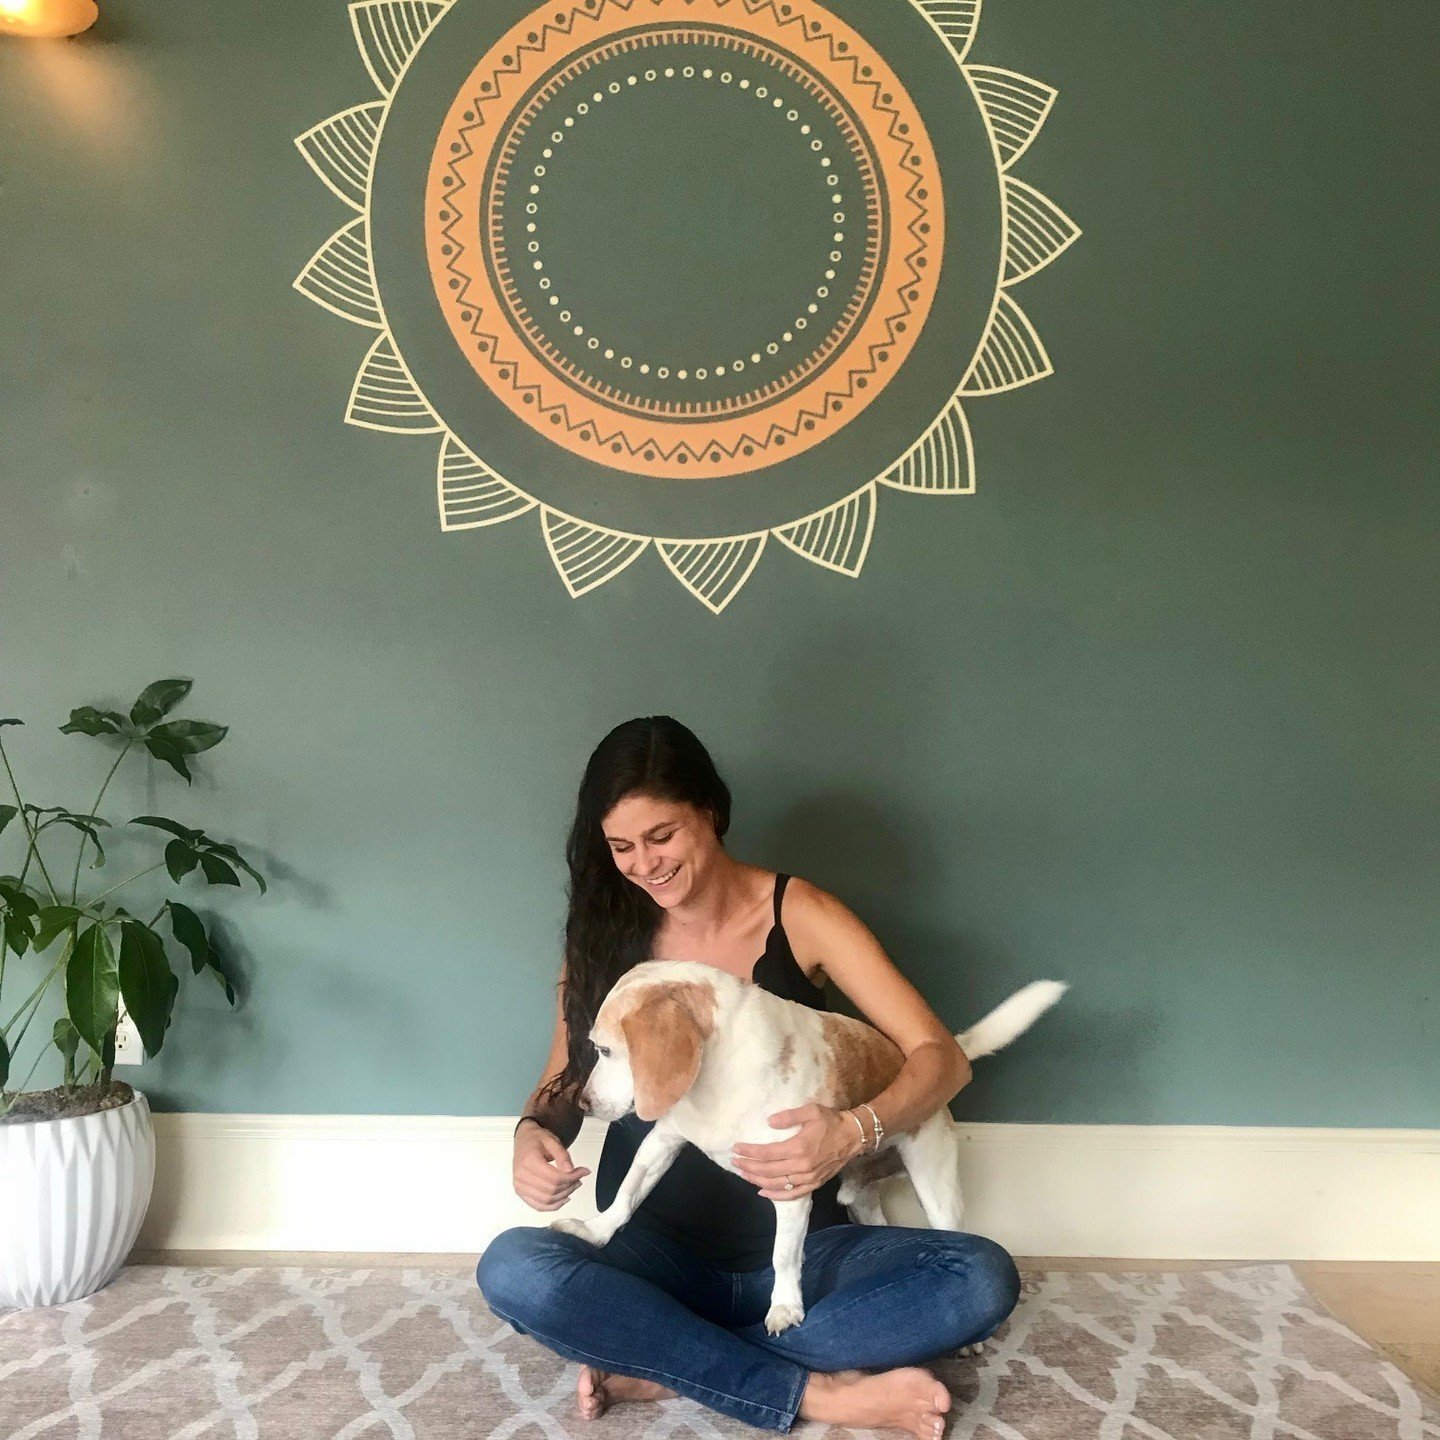 Dear Yoga Loft Community,⁠
⁠
It is with mixed emotions that we announce the departure of our remarkable team member, Ellory, from her role at The Yoga Loft.⁠
⁠
Ellory started at the studio in 2017 after completing her 200-hour teacher training with L